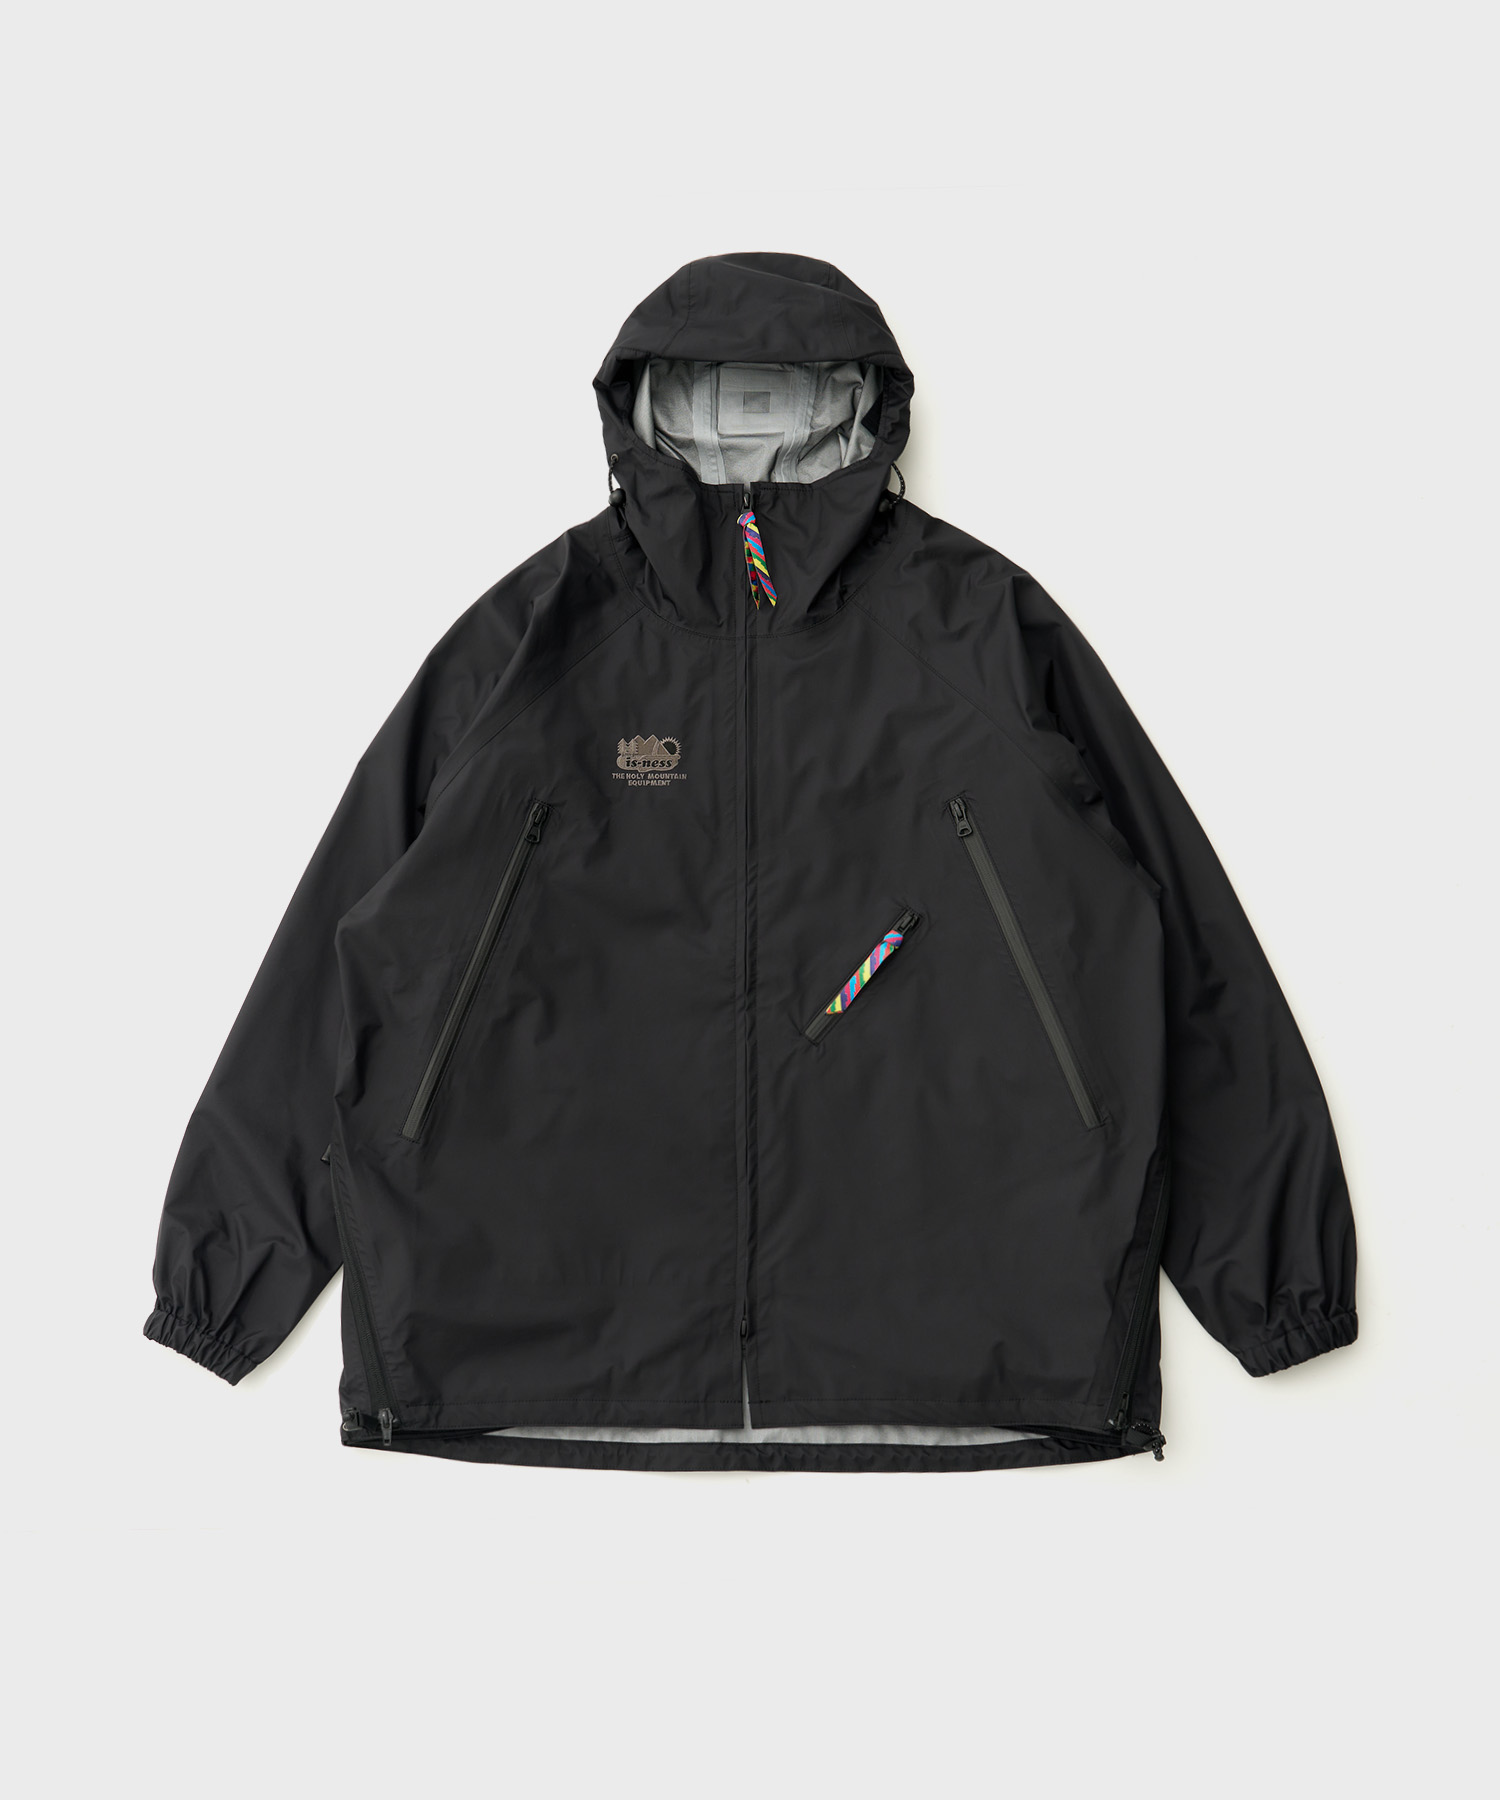 3Layer Transformable Jacket (Black)